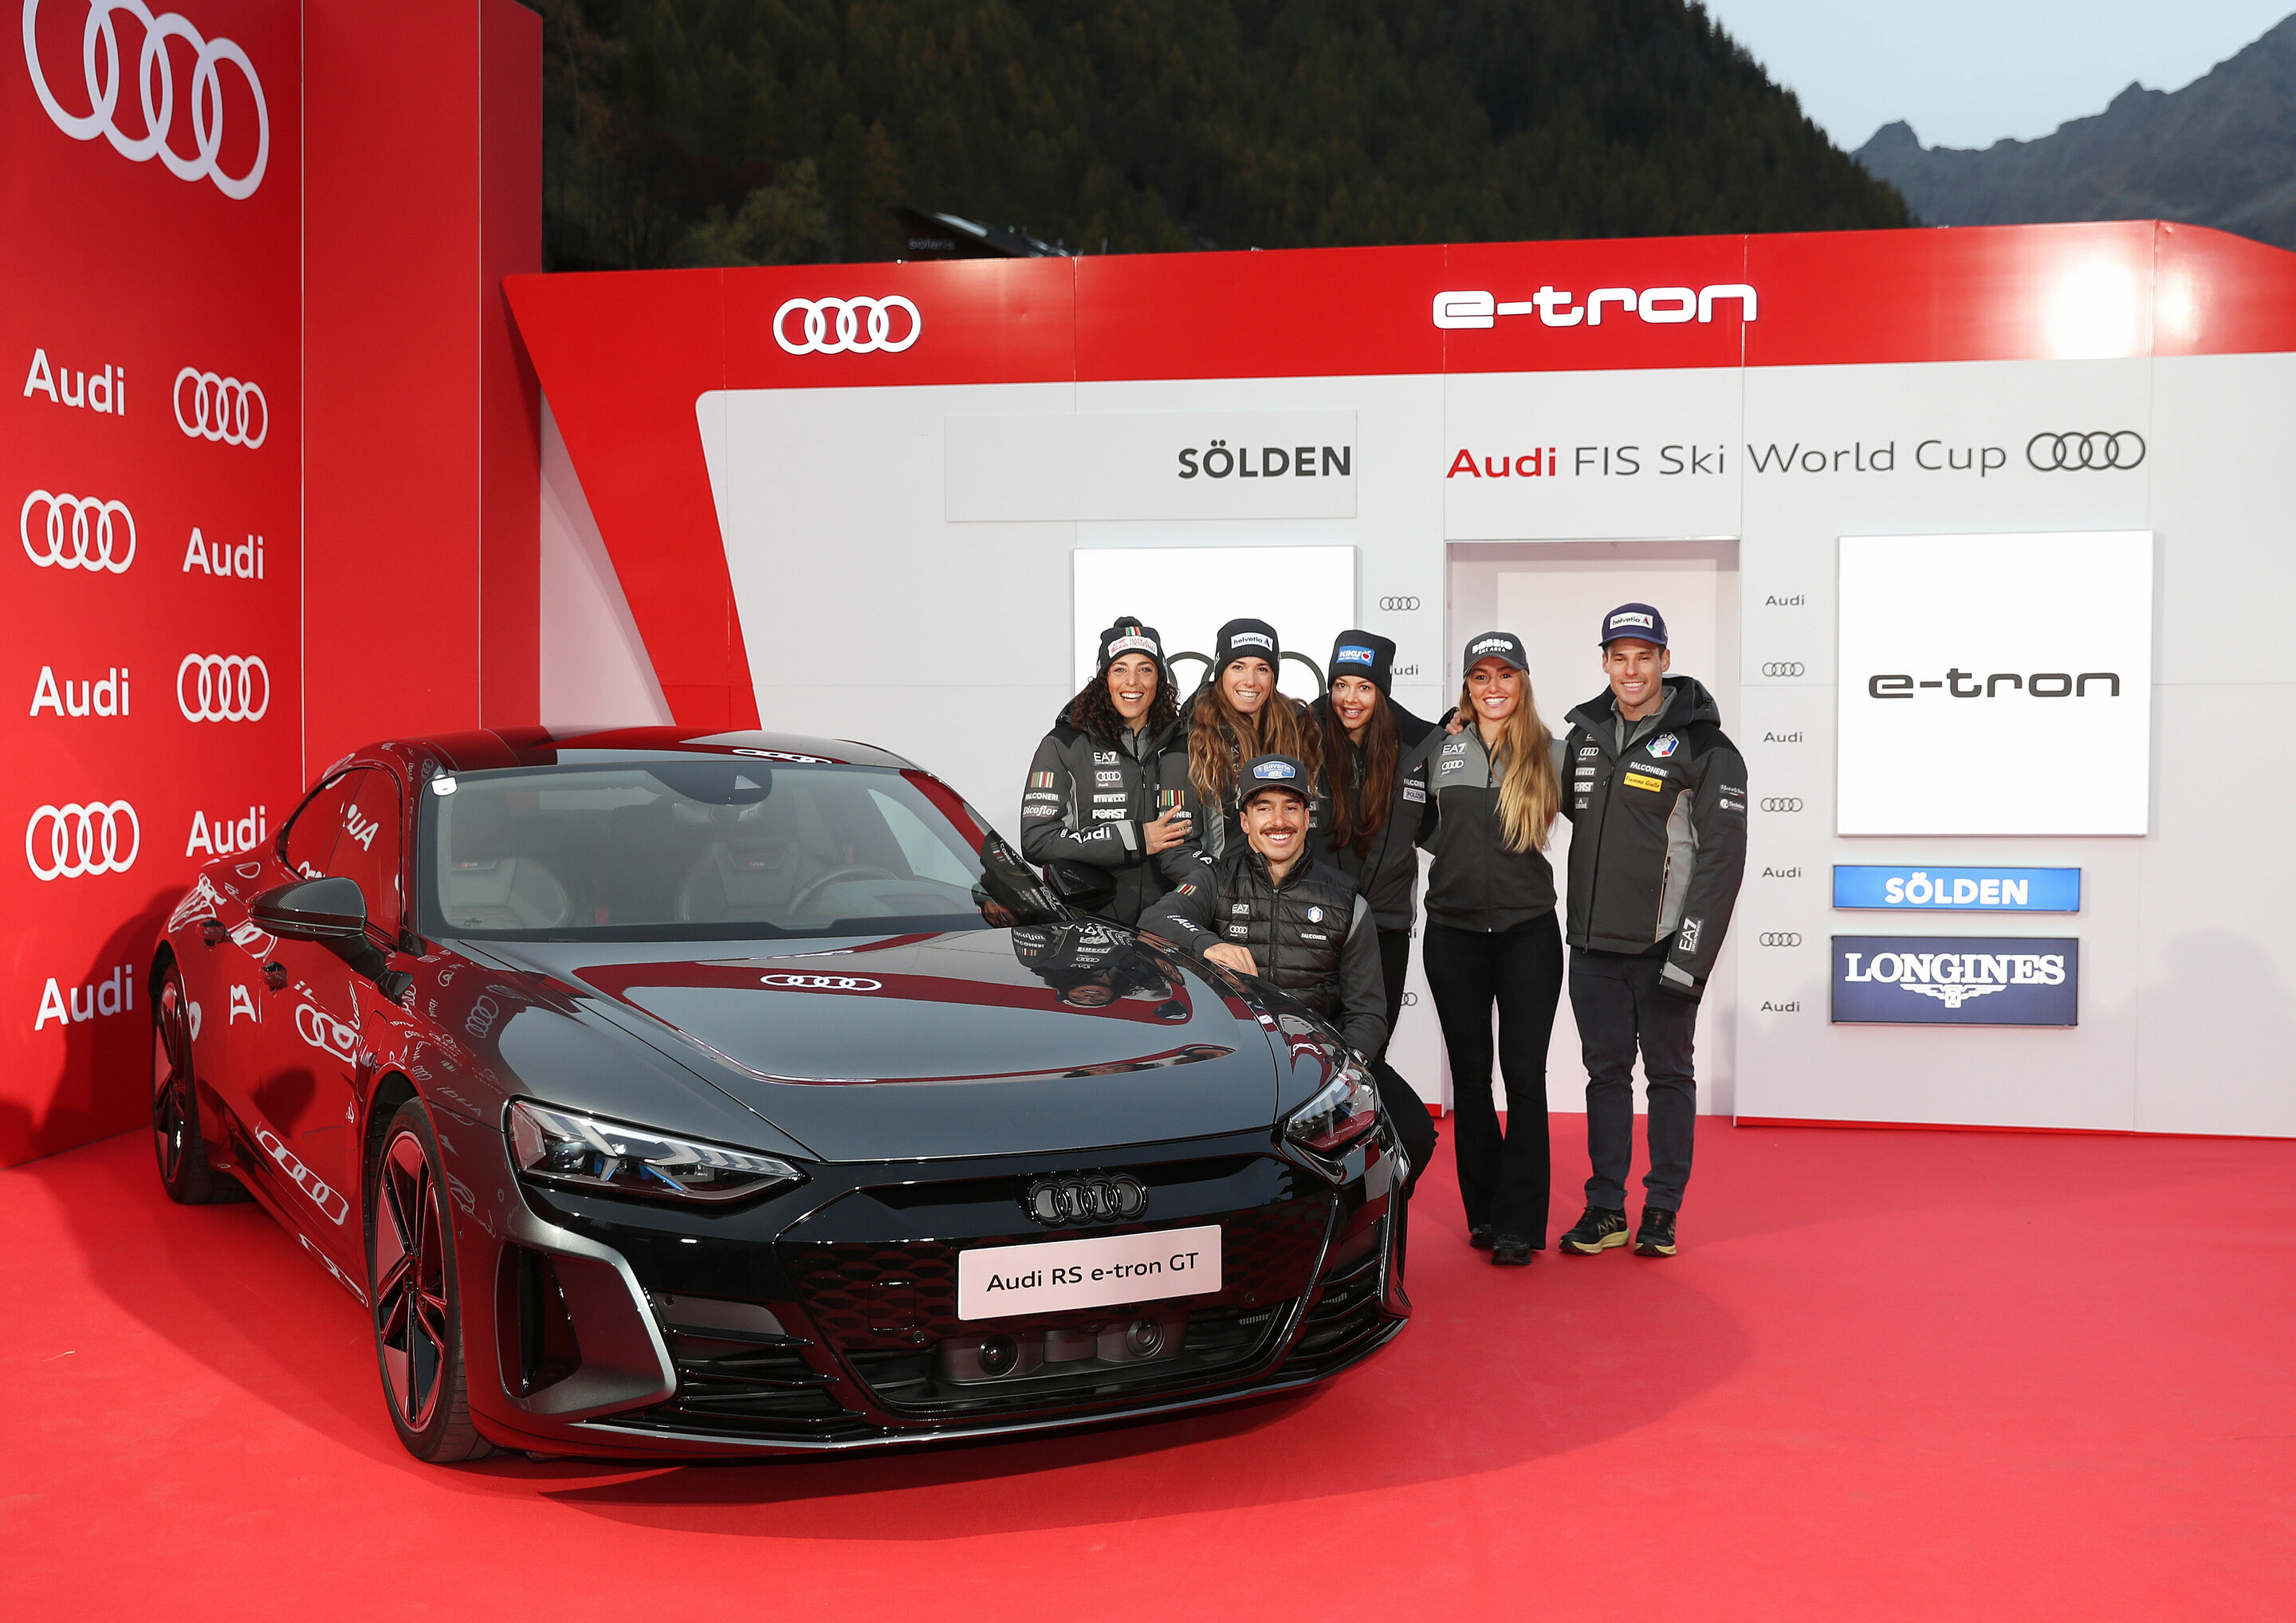 Partnership with FIS extended: Audi to shape Alpine Ski World Cup for four more years